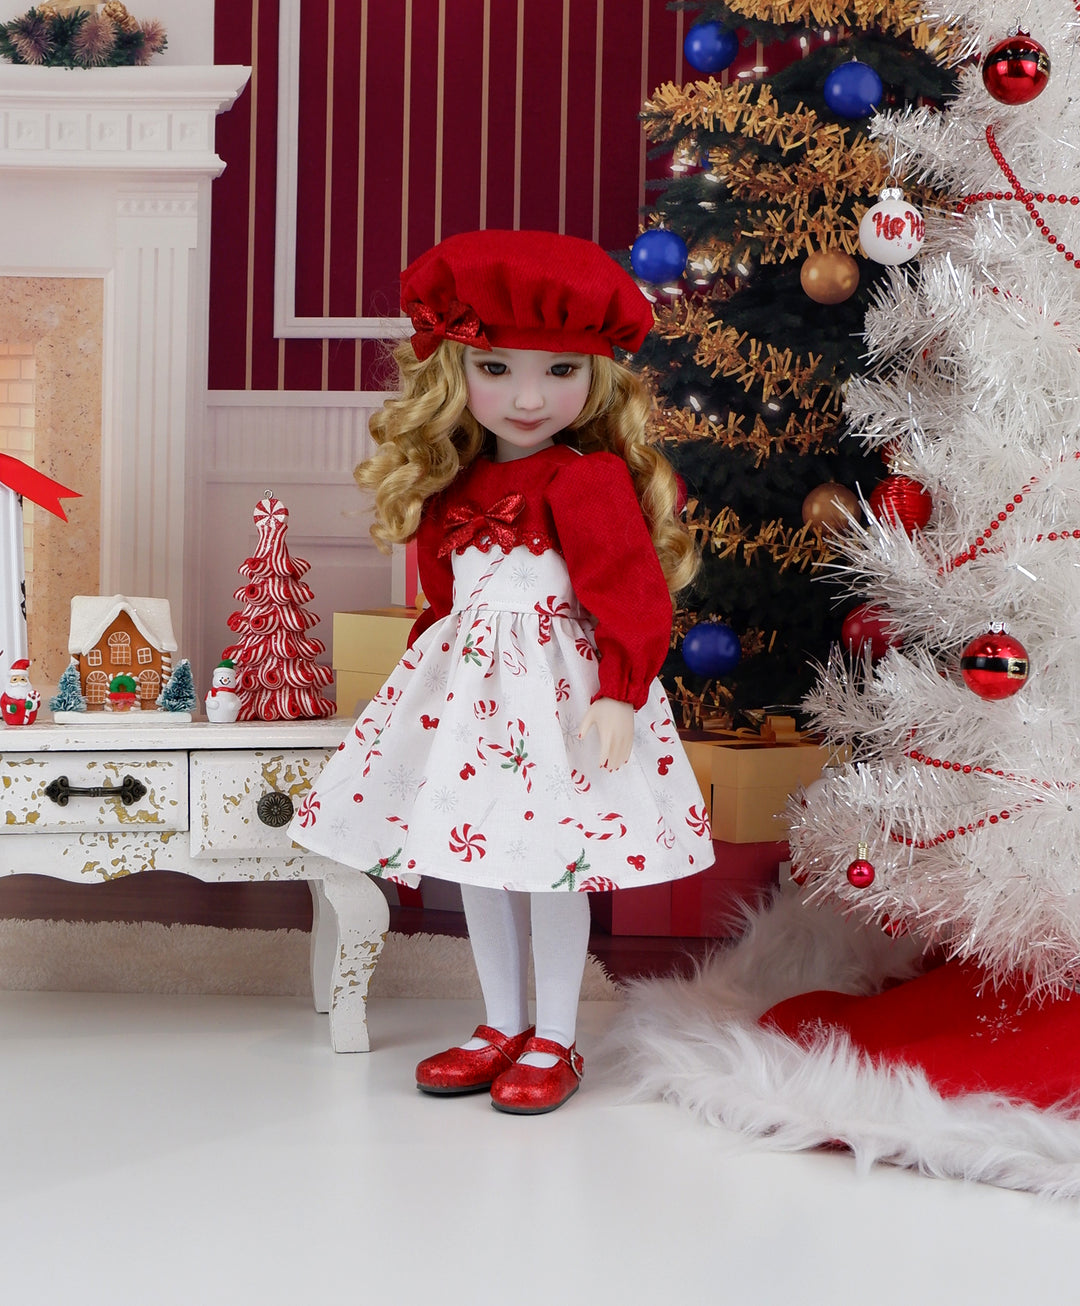 Candy Cane Sparkle - dress with shoes for Ruby Red Fashion Friends doll